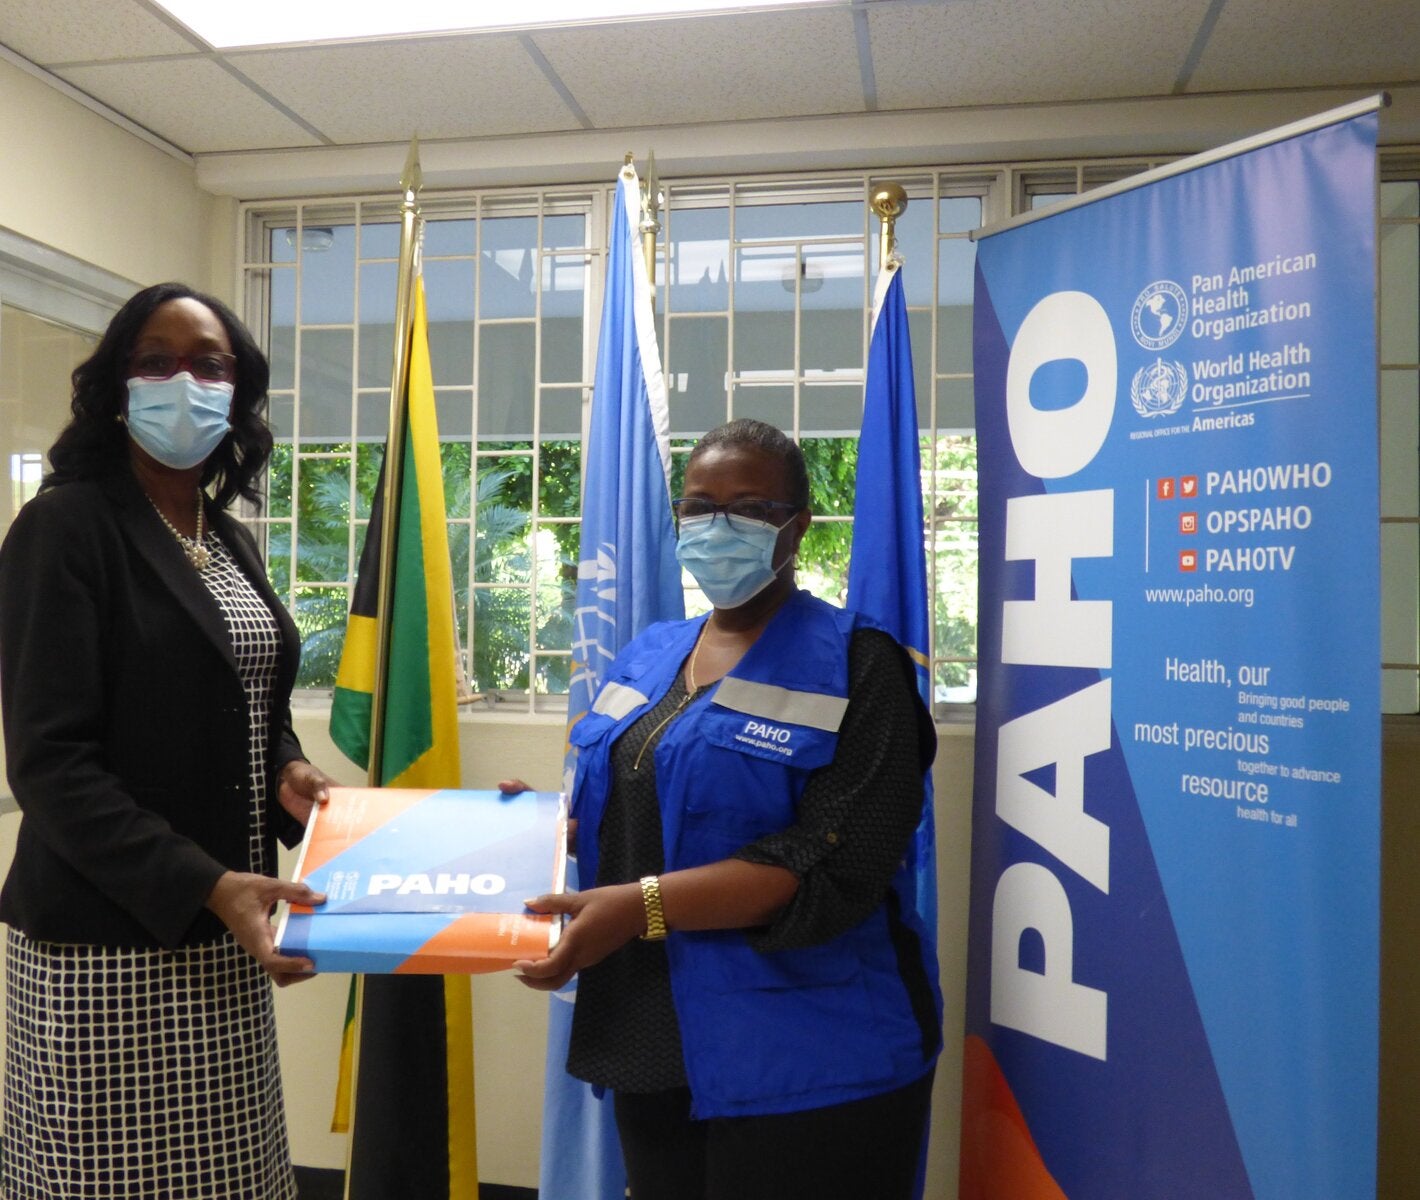 Dr. Michelle Hamilton, Director of the National Public Health Laboratory (left) receives the donation of 6000 Polymerase Chain Reaction (PCR) tests to identify Variants of Concern of COVID-19 (VoC) from Dr. Audrey Morris, Decentralized Regional Advisor, Food and Nutrition (right) at the offices of the Pan American Health Organization/ World Health Organization in Kingston.